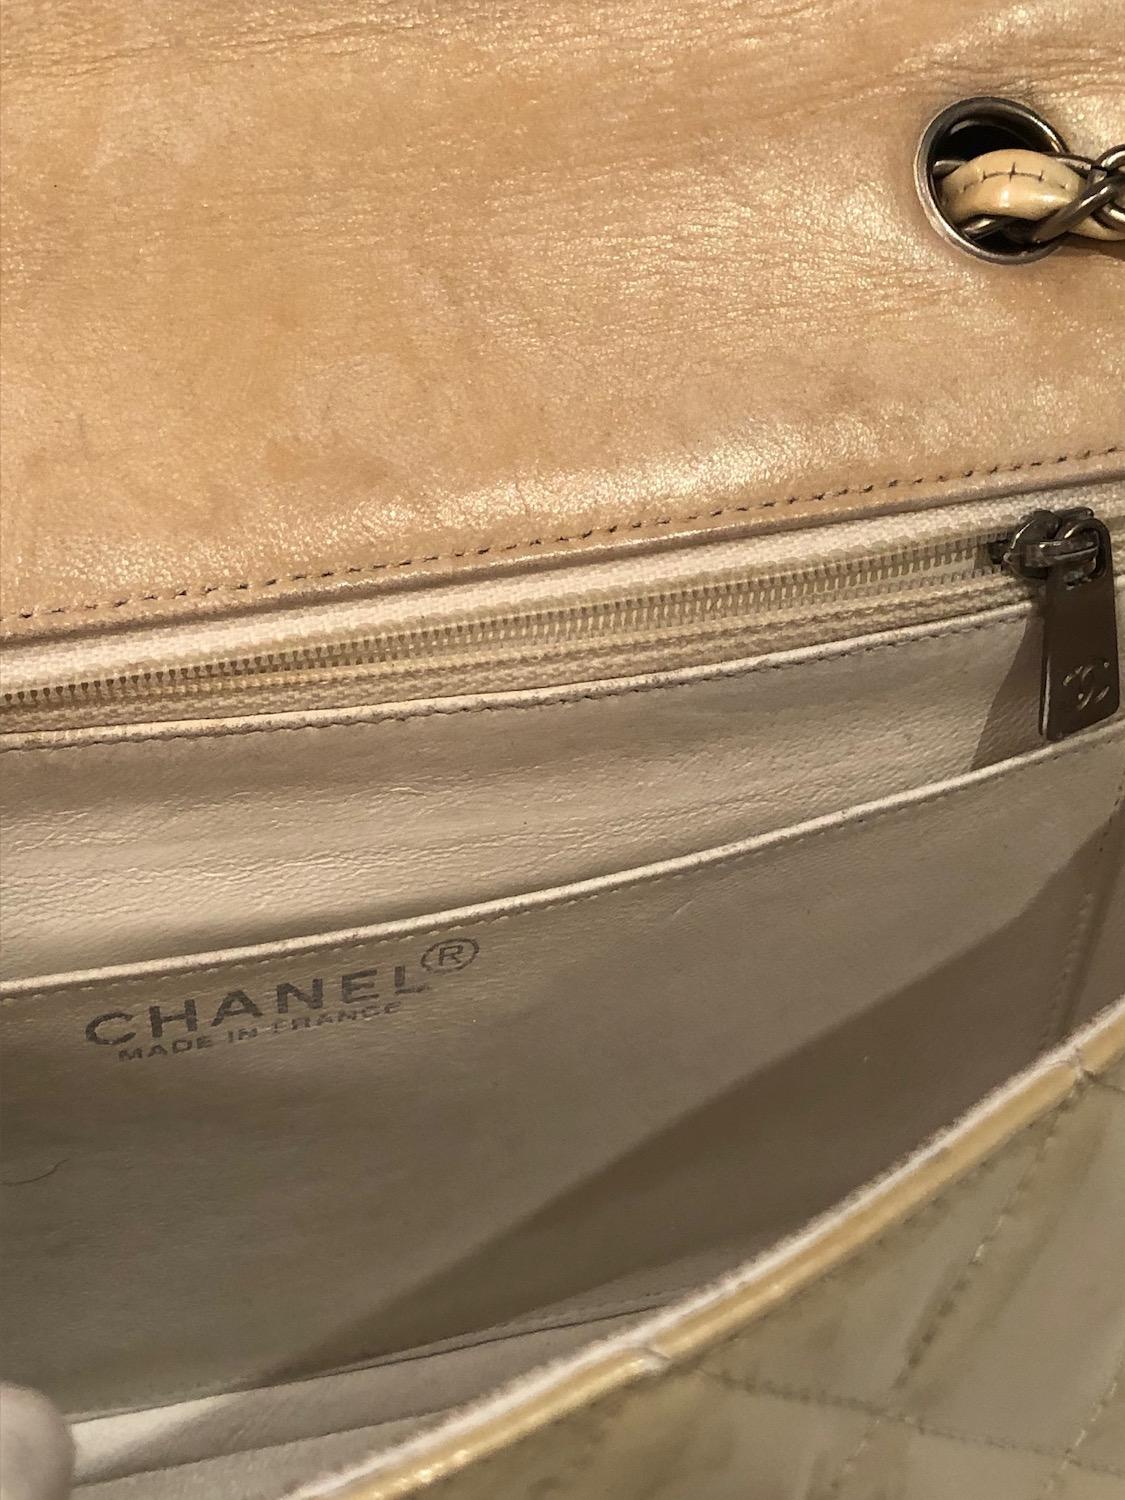 CHANEL Timeless 2.55 Flap Bag Patent Leather Cream Circa 2000 For Sale 9